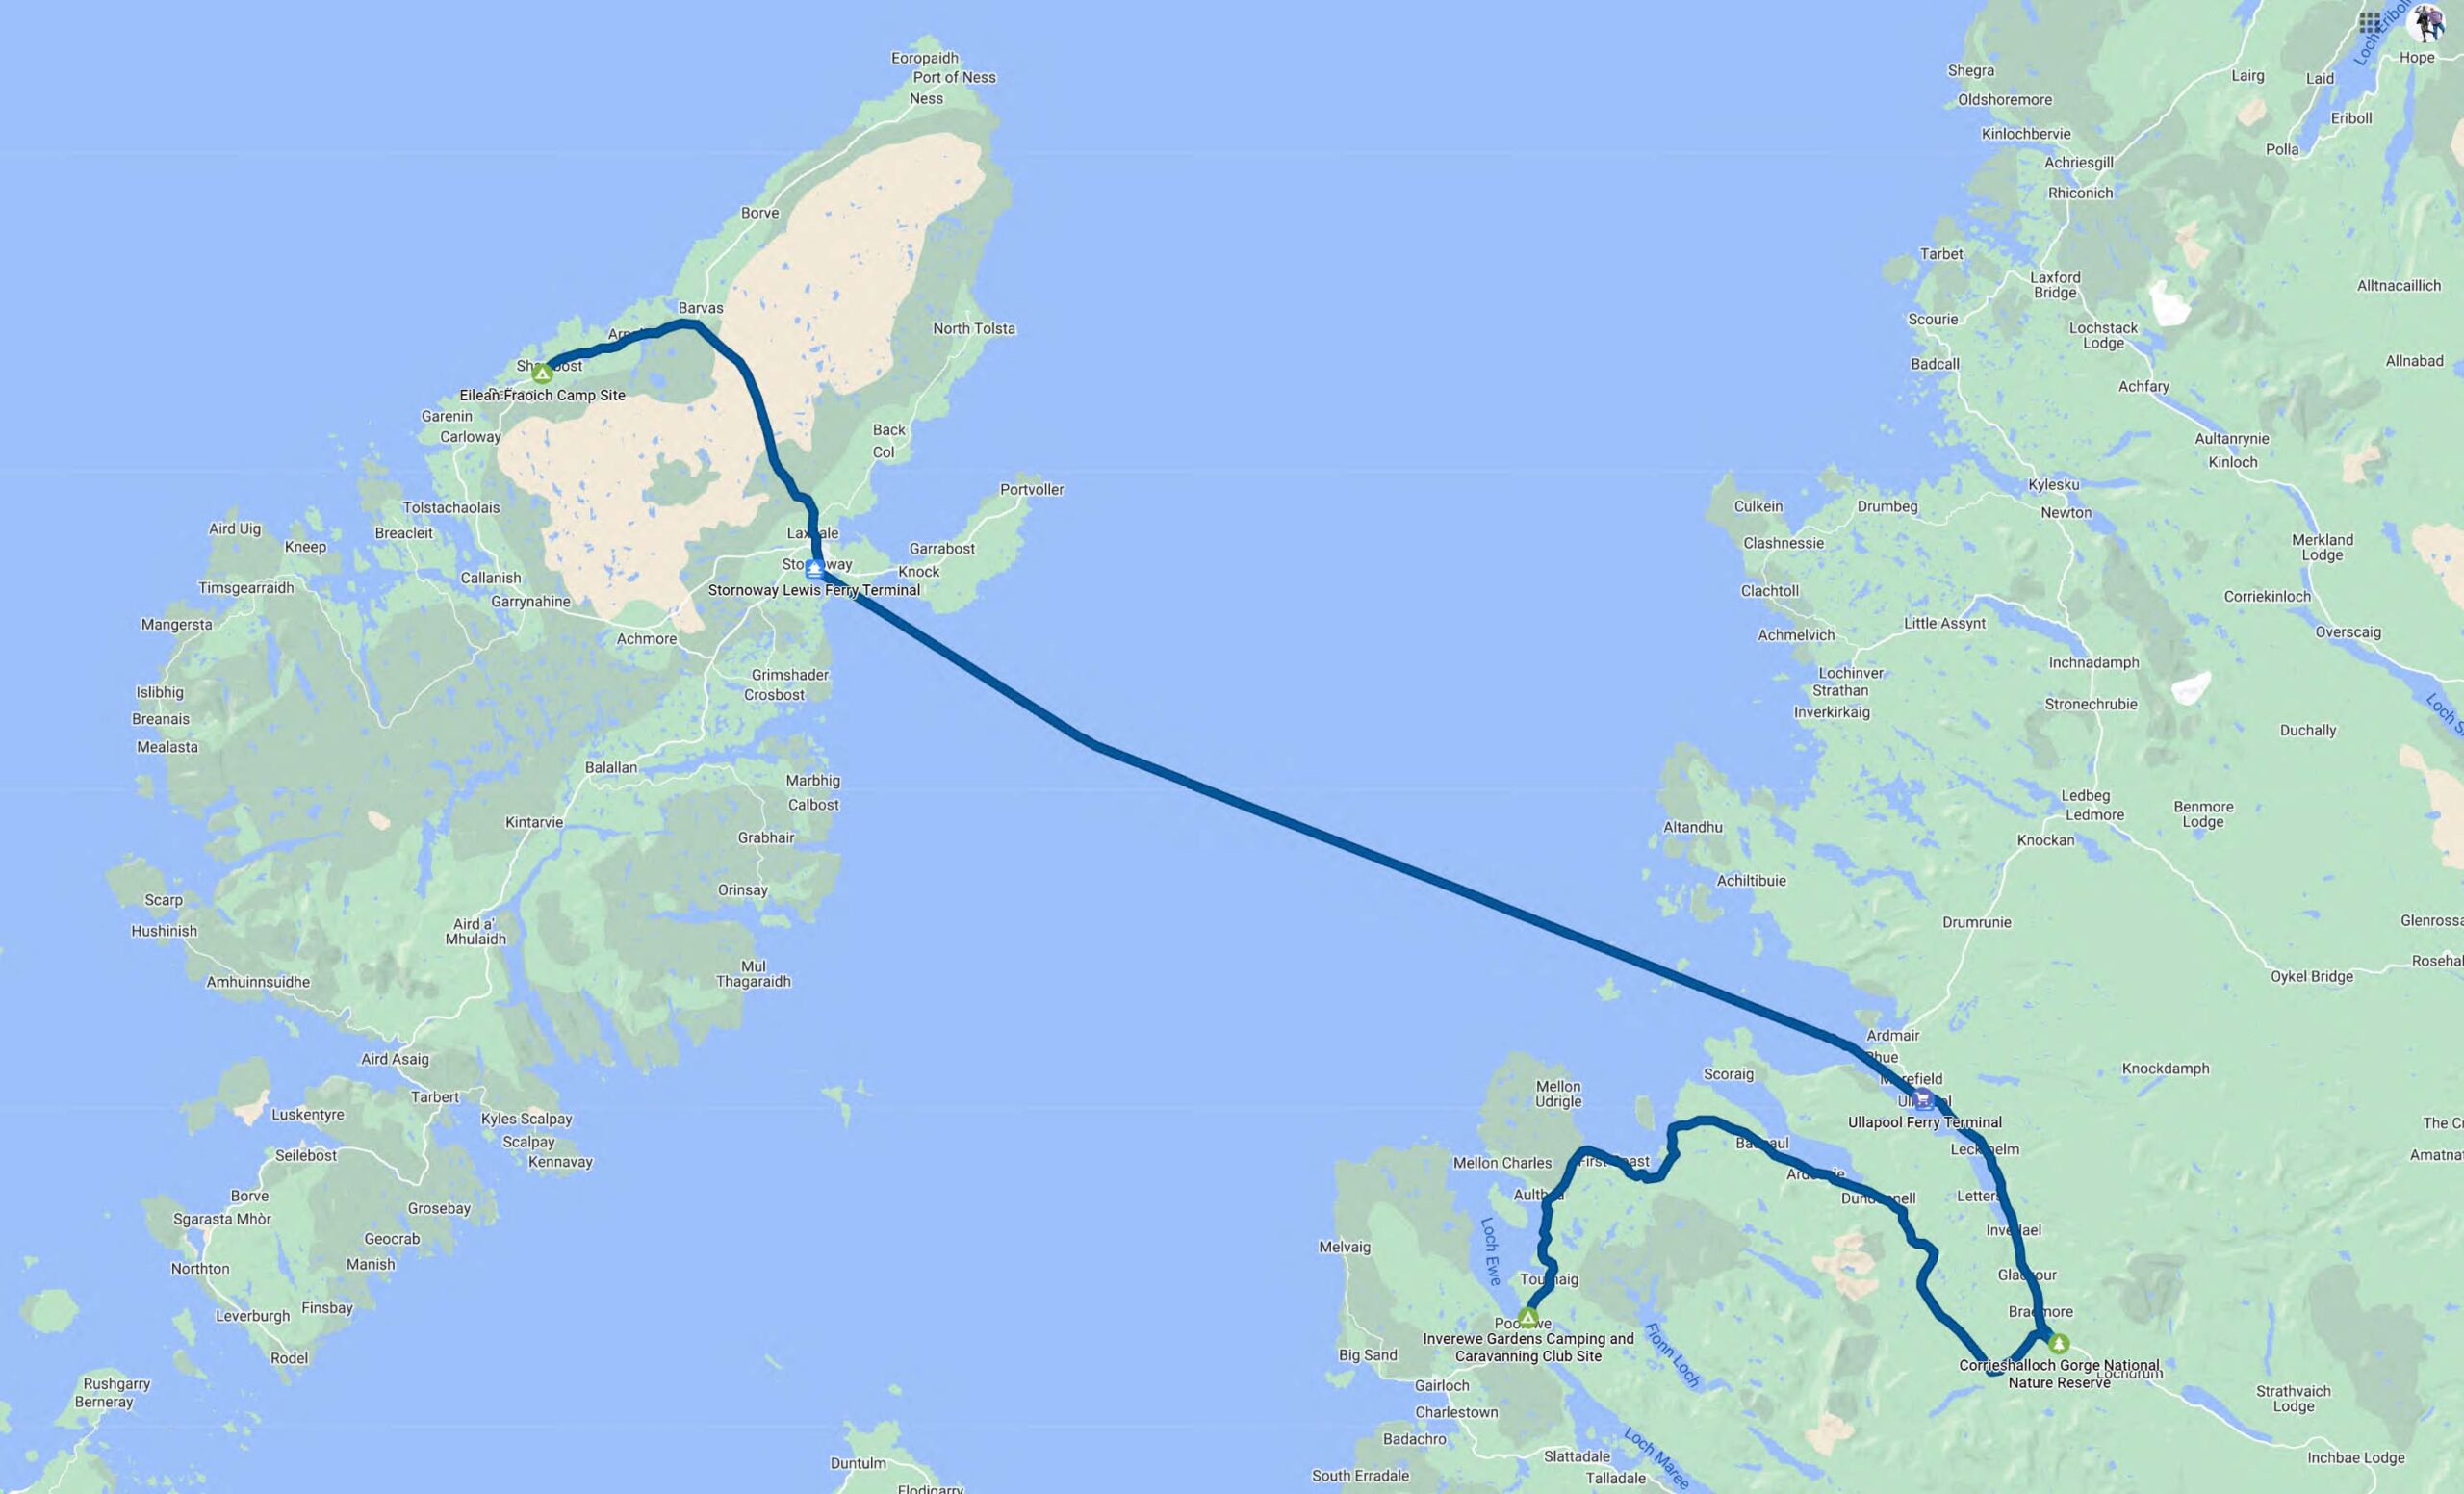 Route from Stornoway to Ullapool and then Poolewe